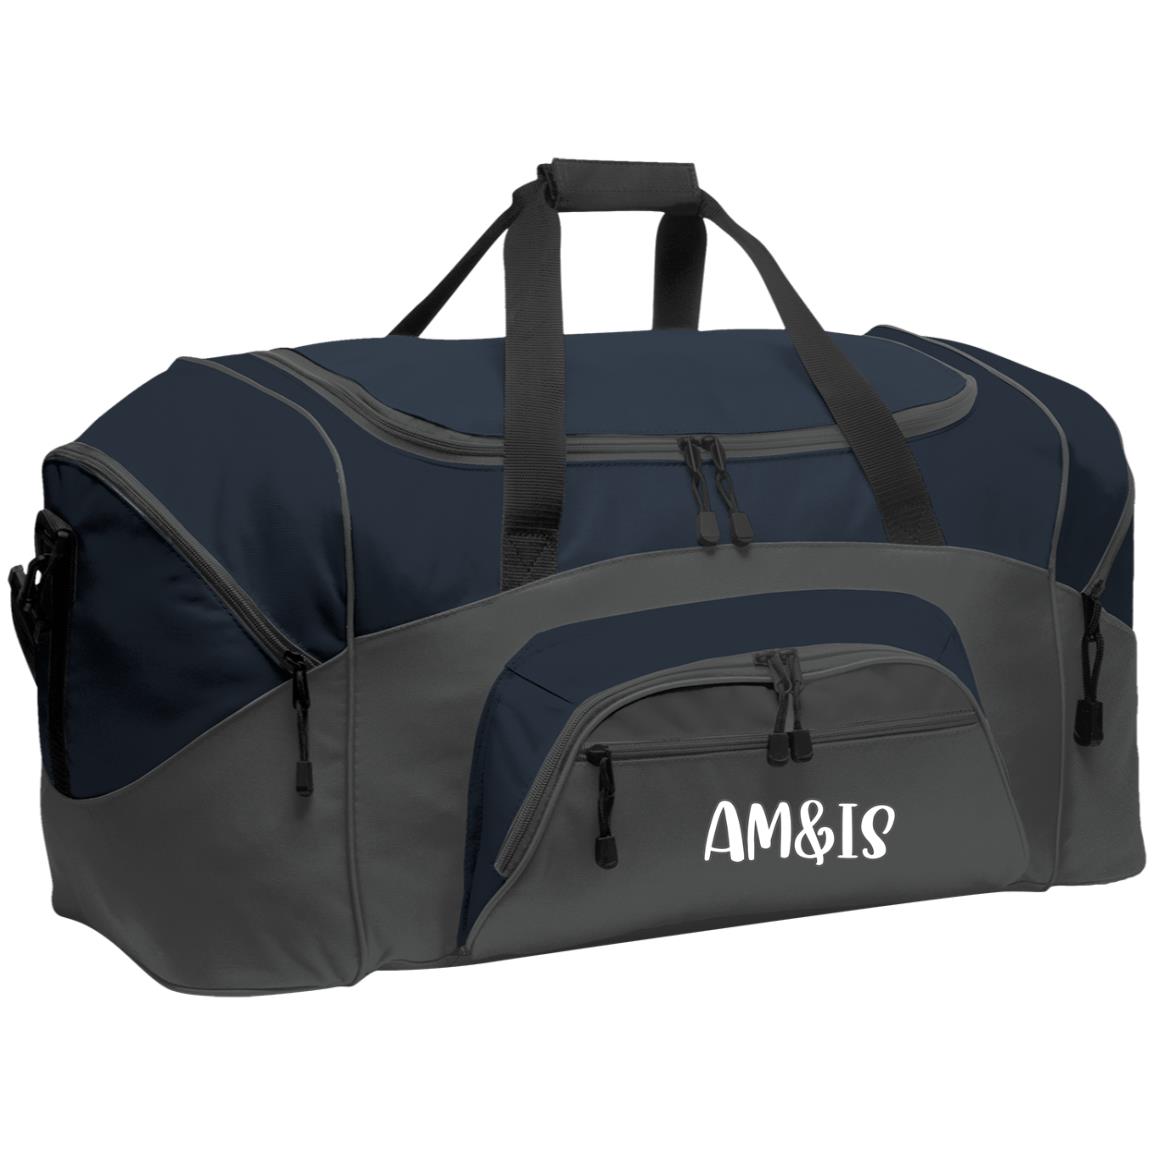 DARK CHARCOAL/NAVY ONE SIZE - AM&IS Activewear Colorblock Sport Duffel - duffel bag at TFC&H Co.